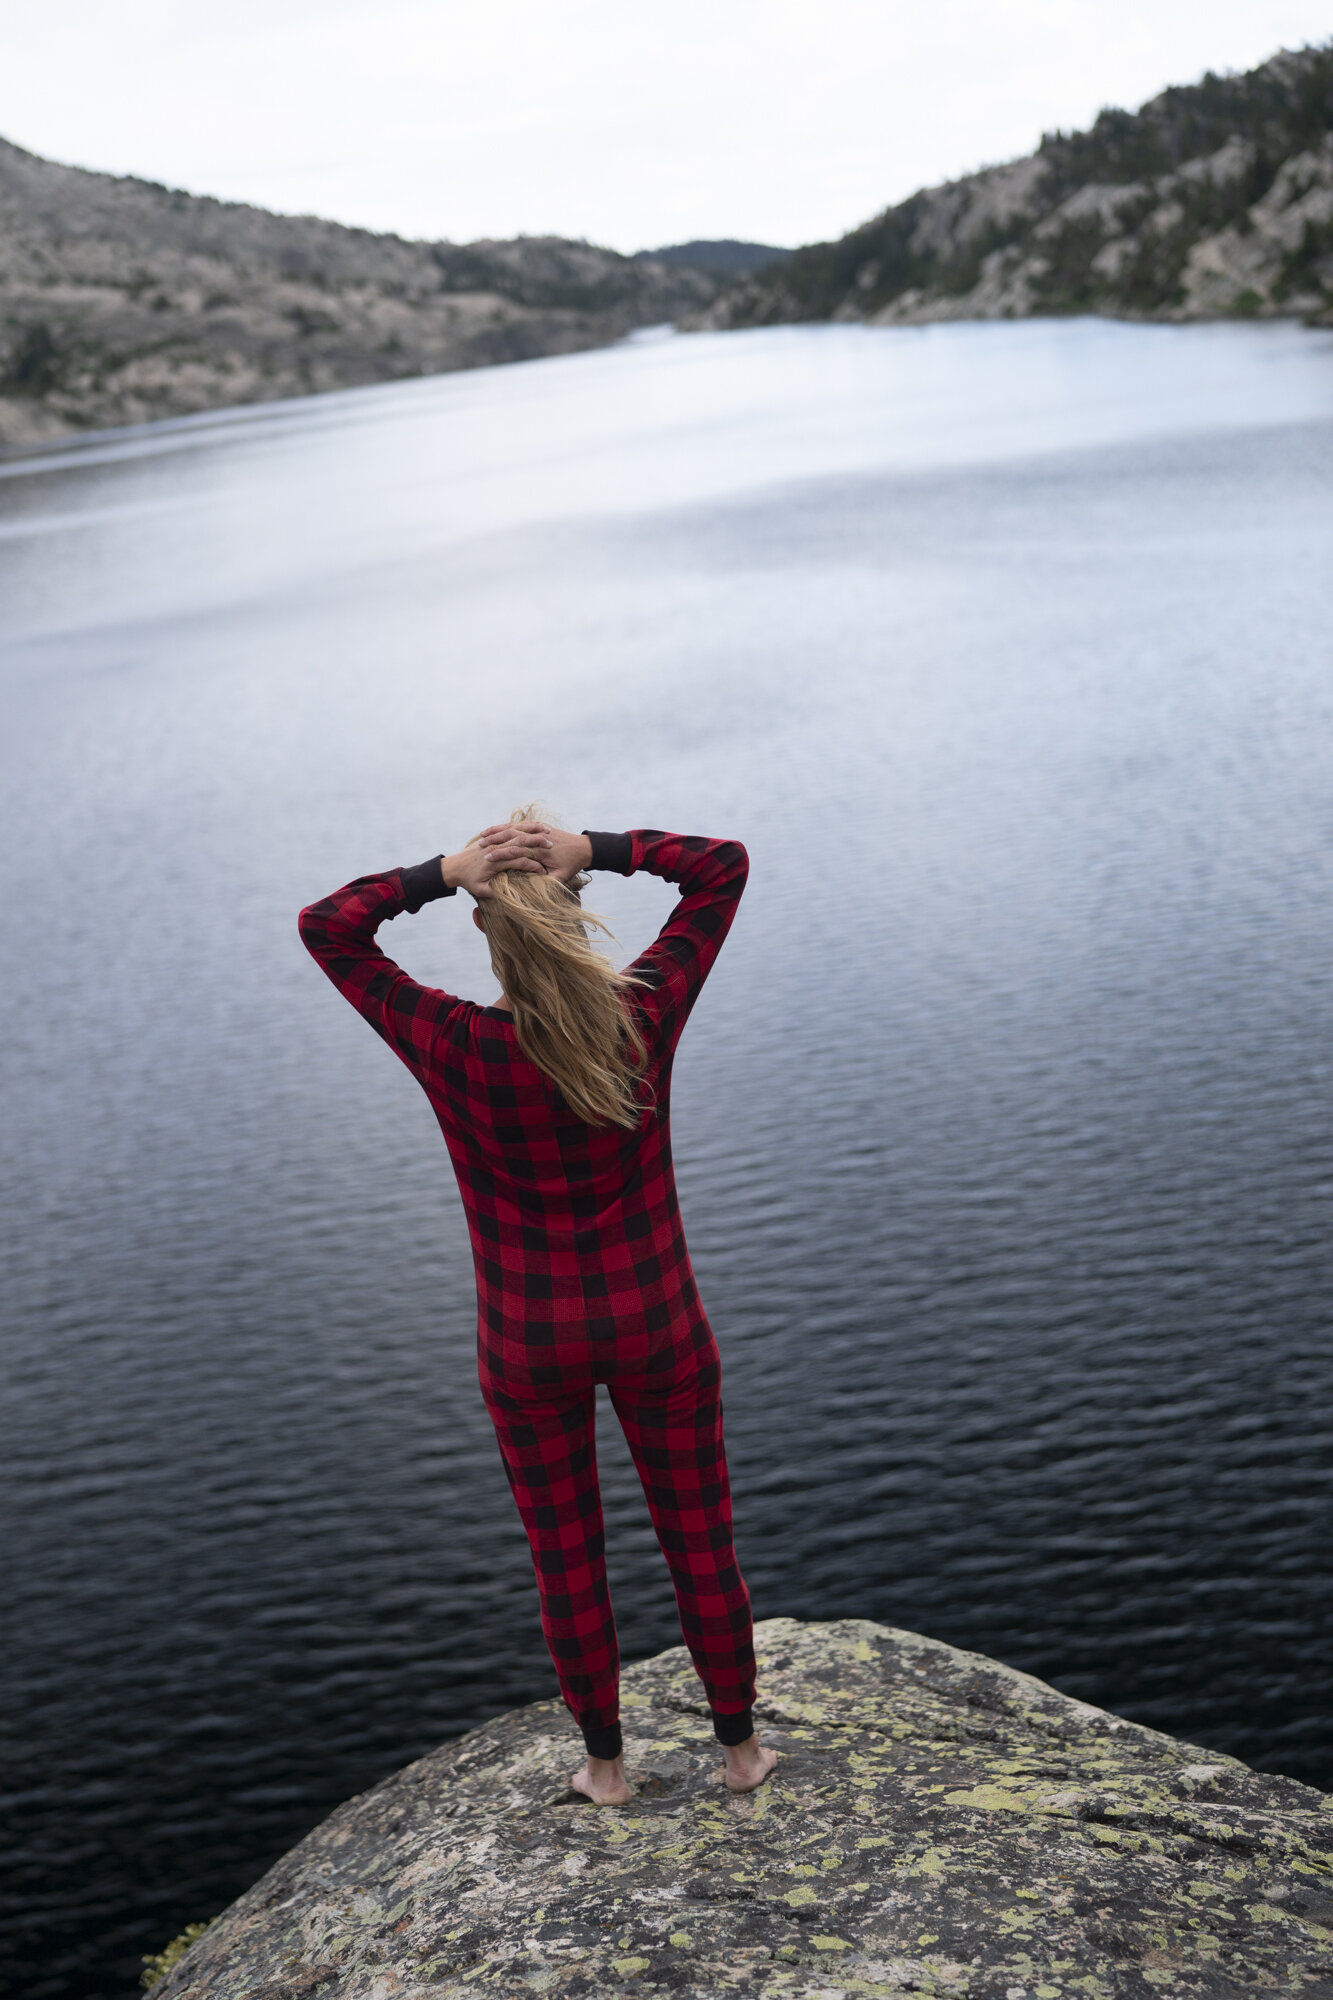  A girl in red and black pajamas standing on a rover overlooking Seneca Lake in the Wind River Range - Wyoming.  